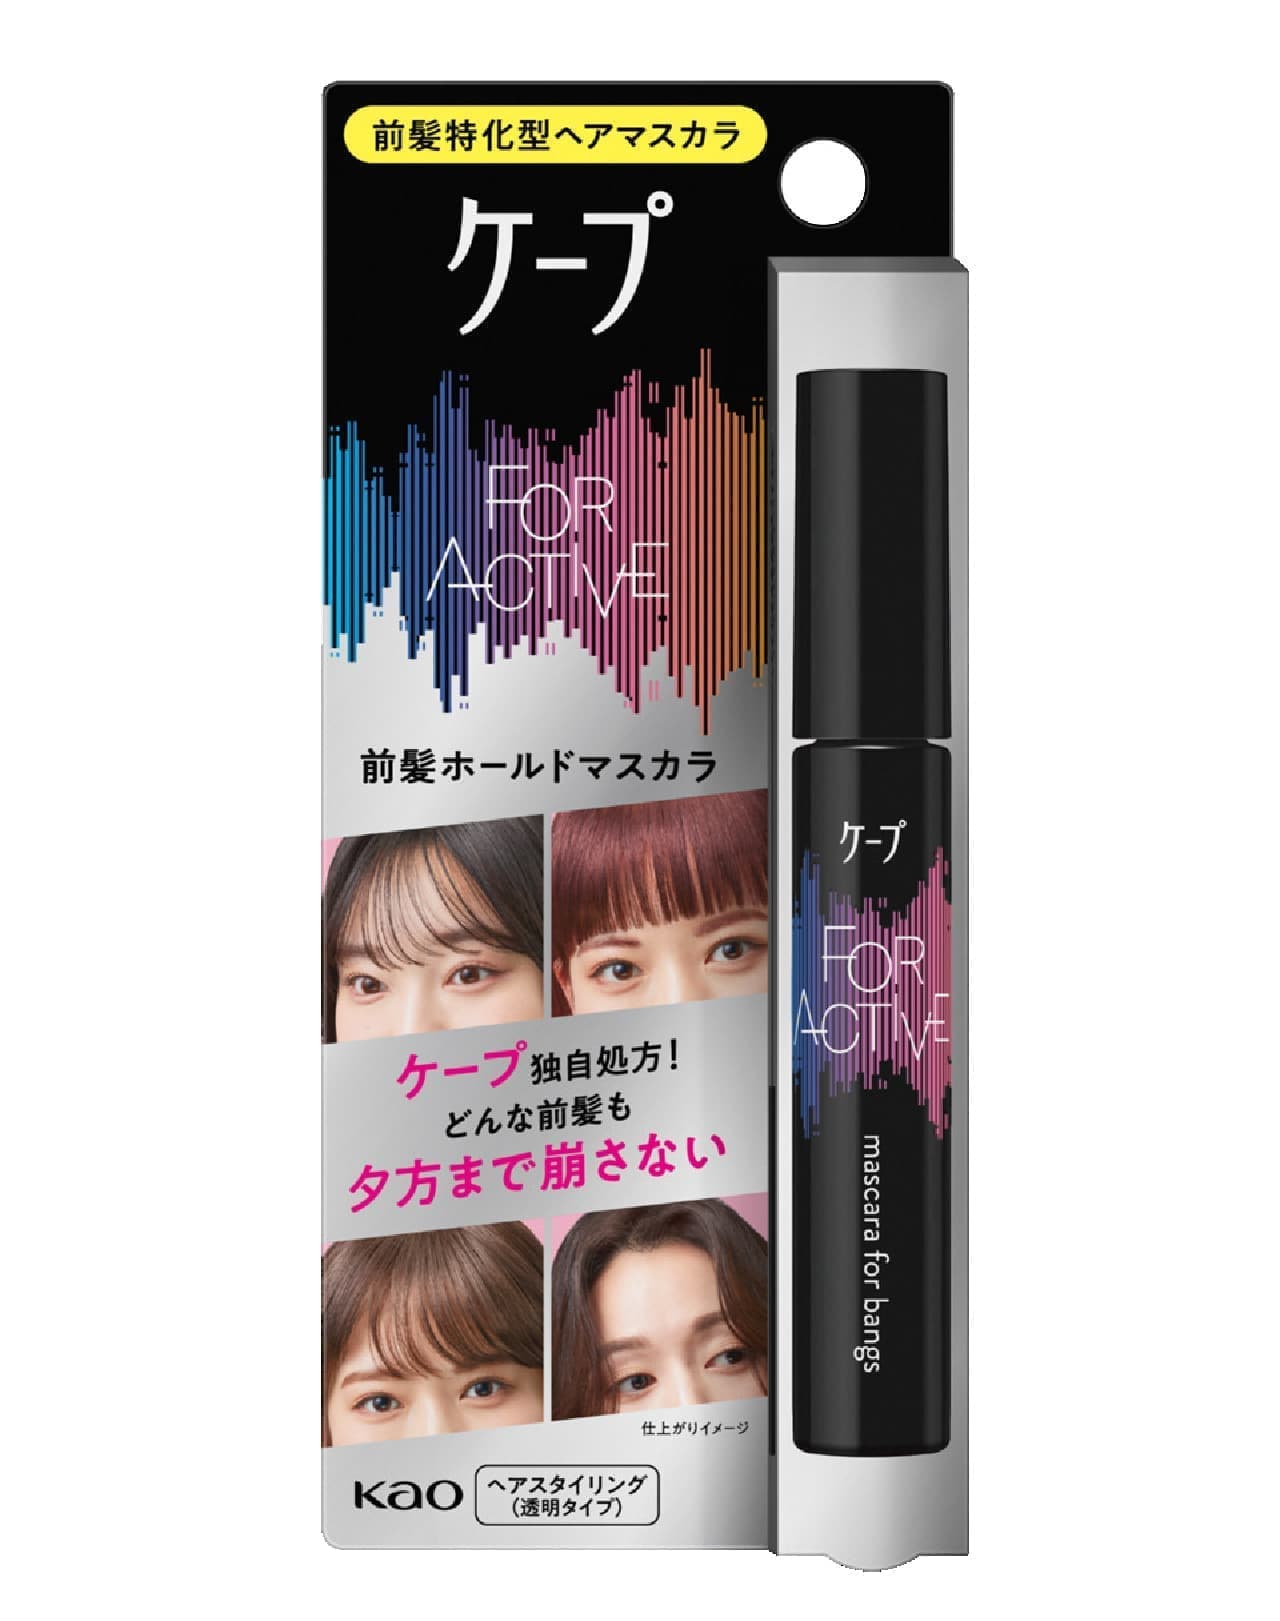 Cape FOR ACTIVE Bangs Hold Mascara